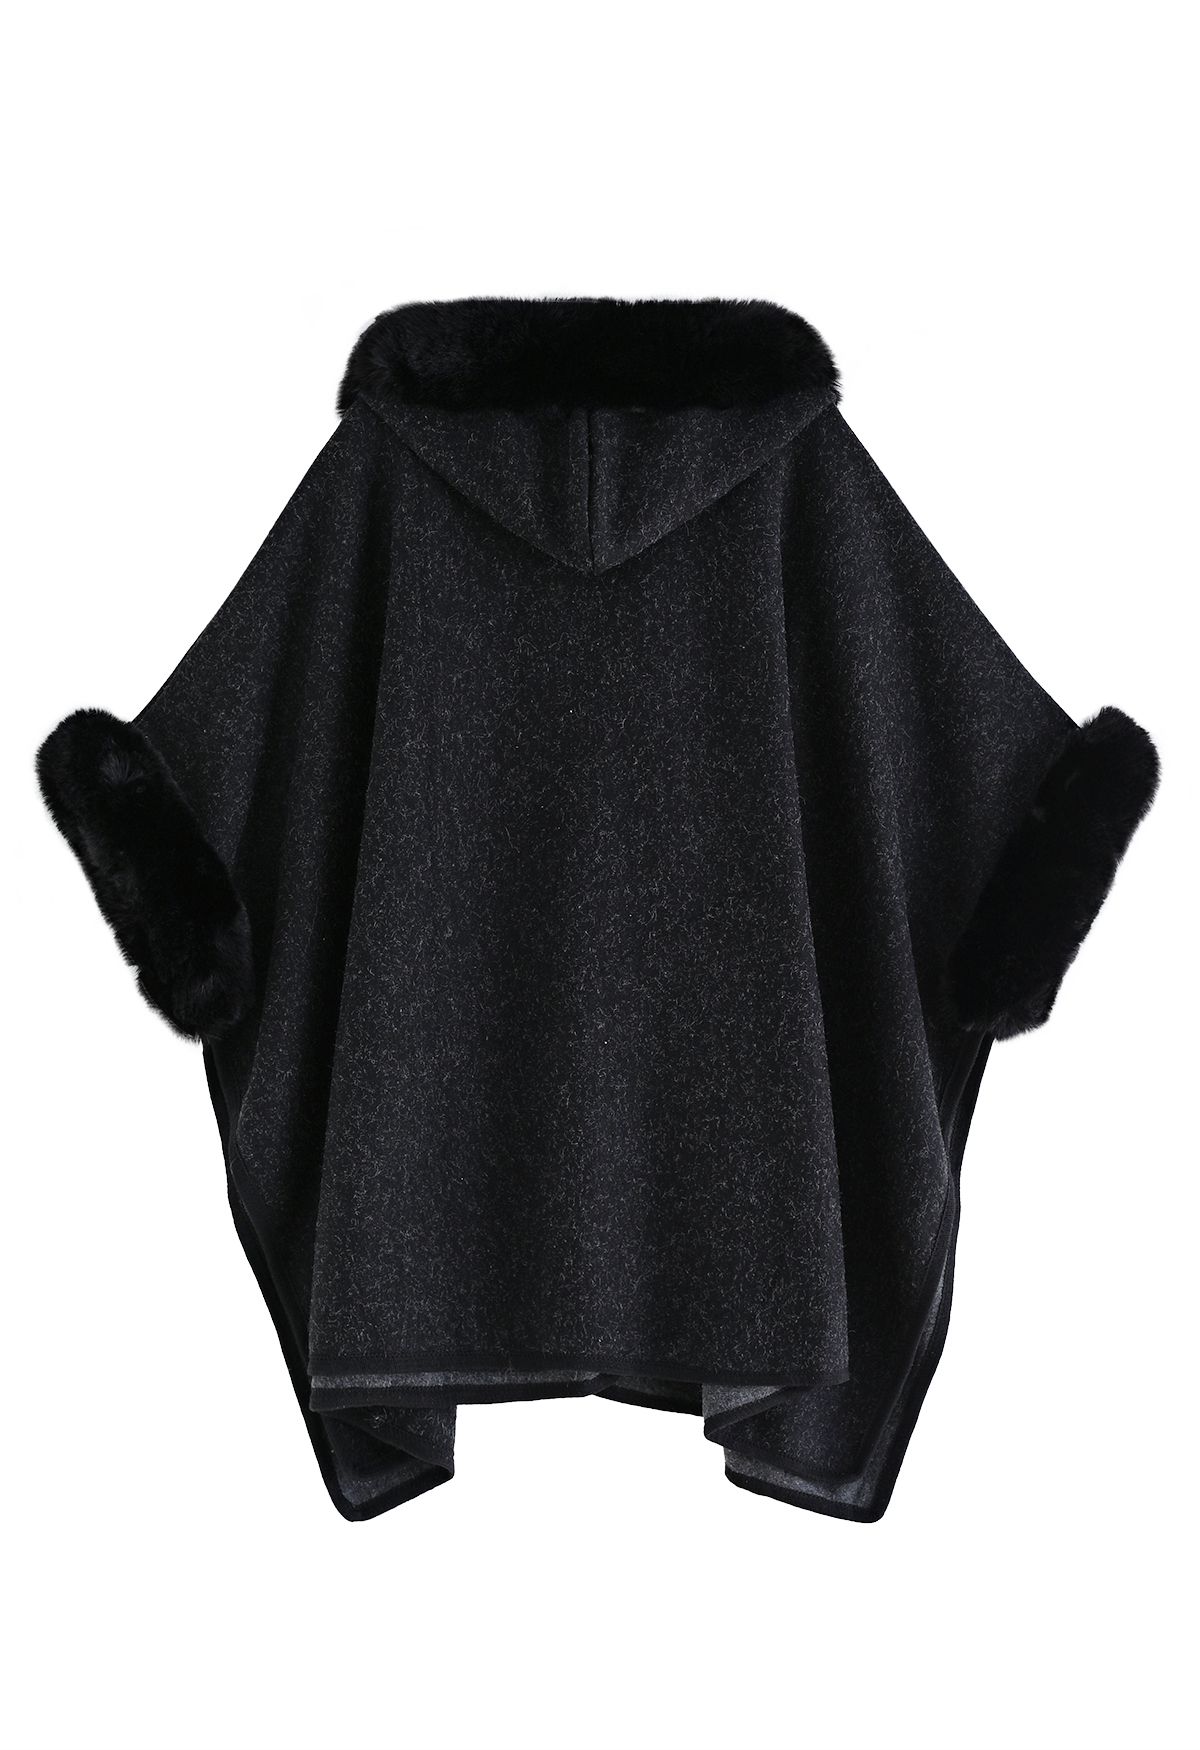 Cozy Faux Fur Hooded Poncho in Black - Retro, Indie and Unique Fashion